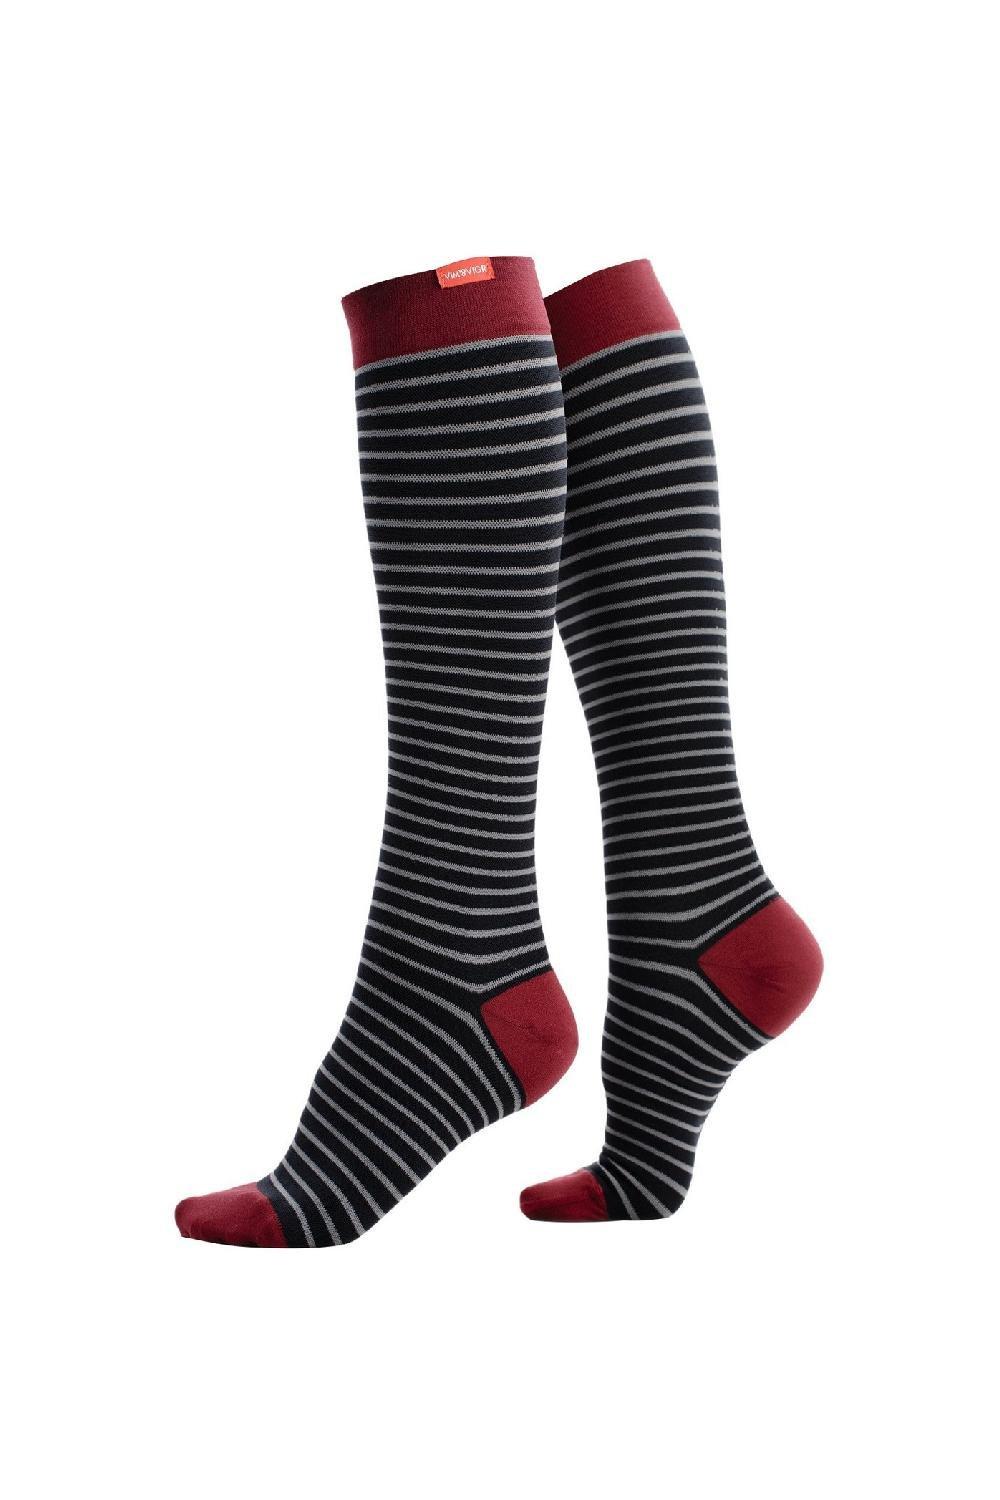 Graduated Compression Socks 30-40 mmhg with Nylon for Swollen Legs